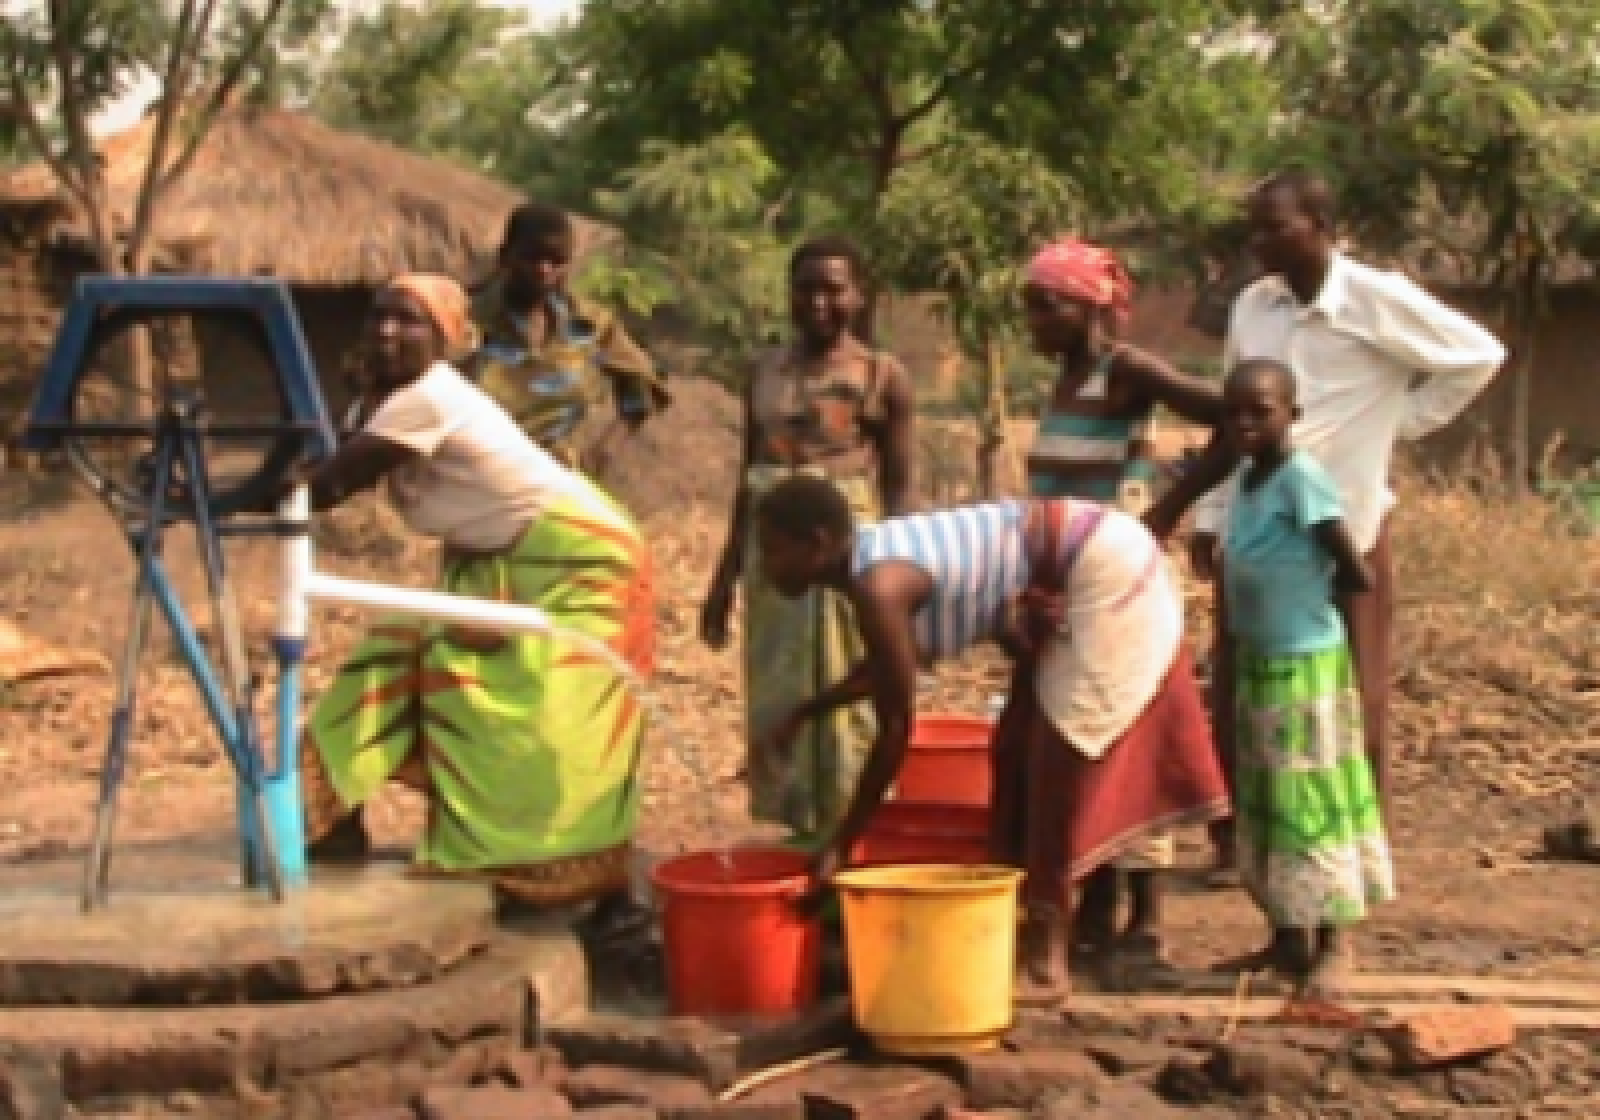 Issue-Based Elections Help Bring Clean Water to Mpomba, Malawi